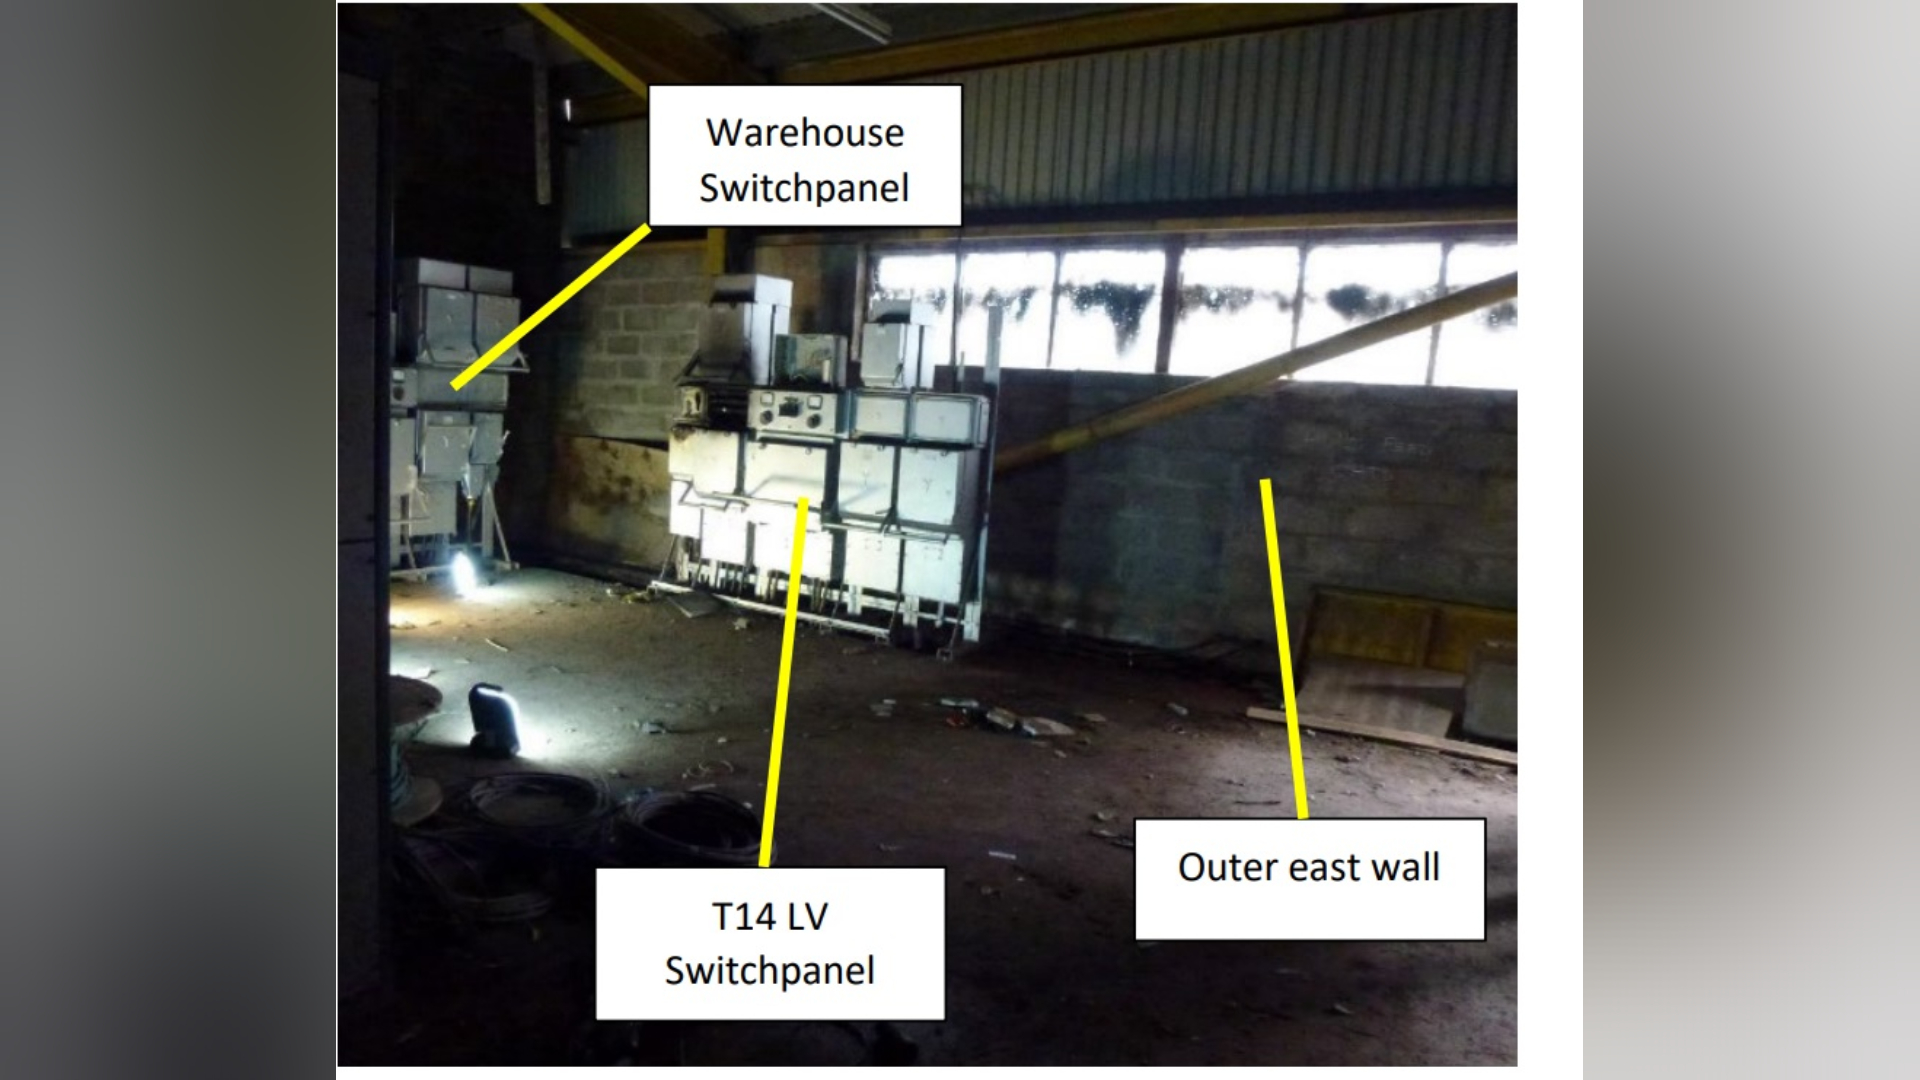 Image provided by the COPFS of the inside of switchpanels.